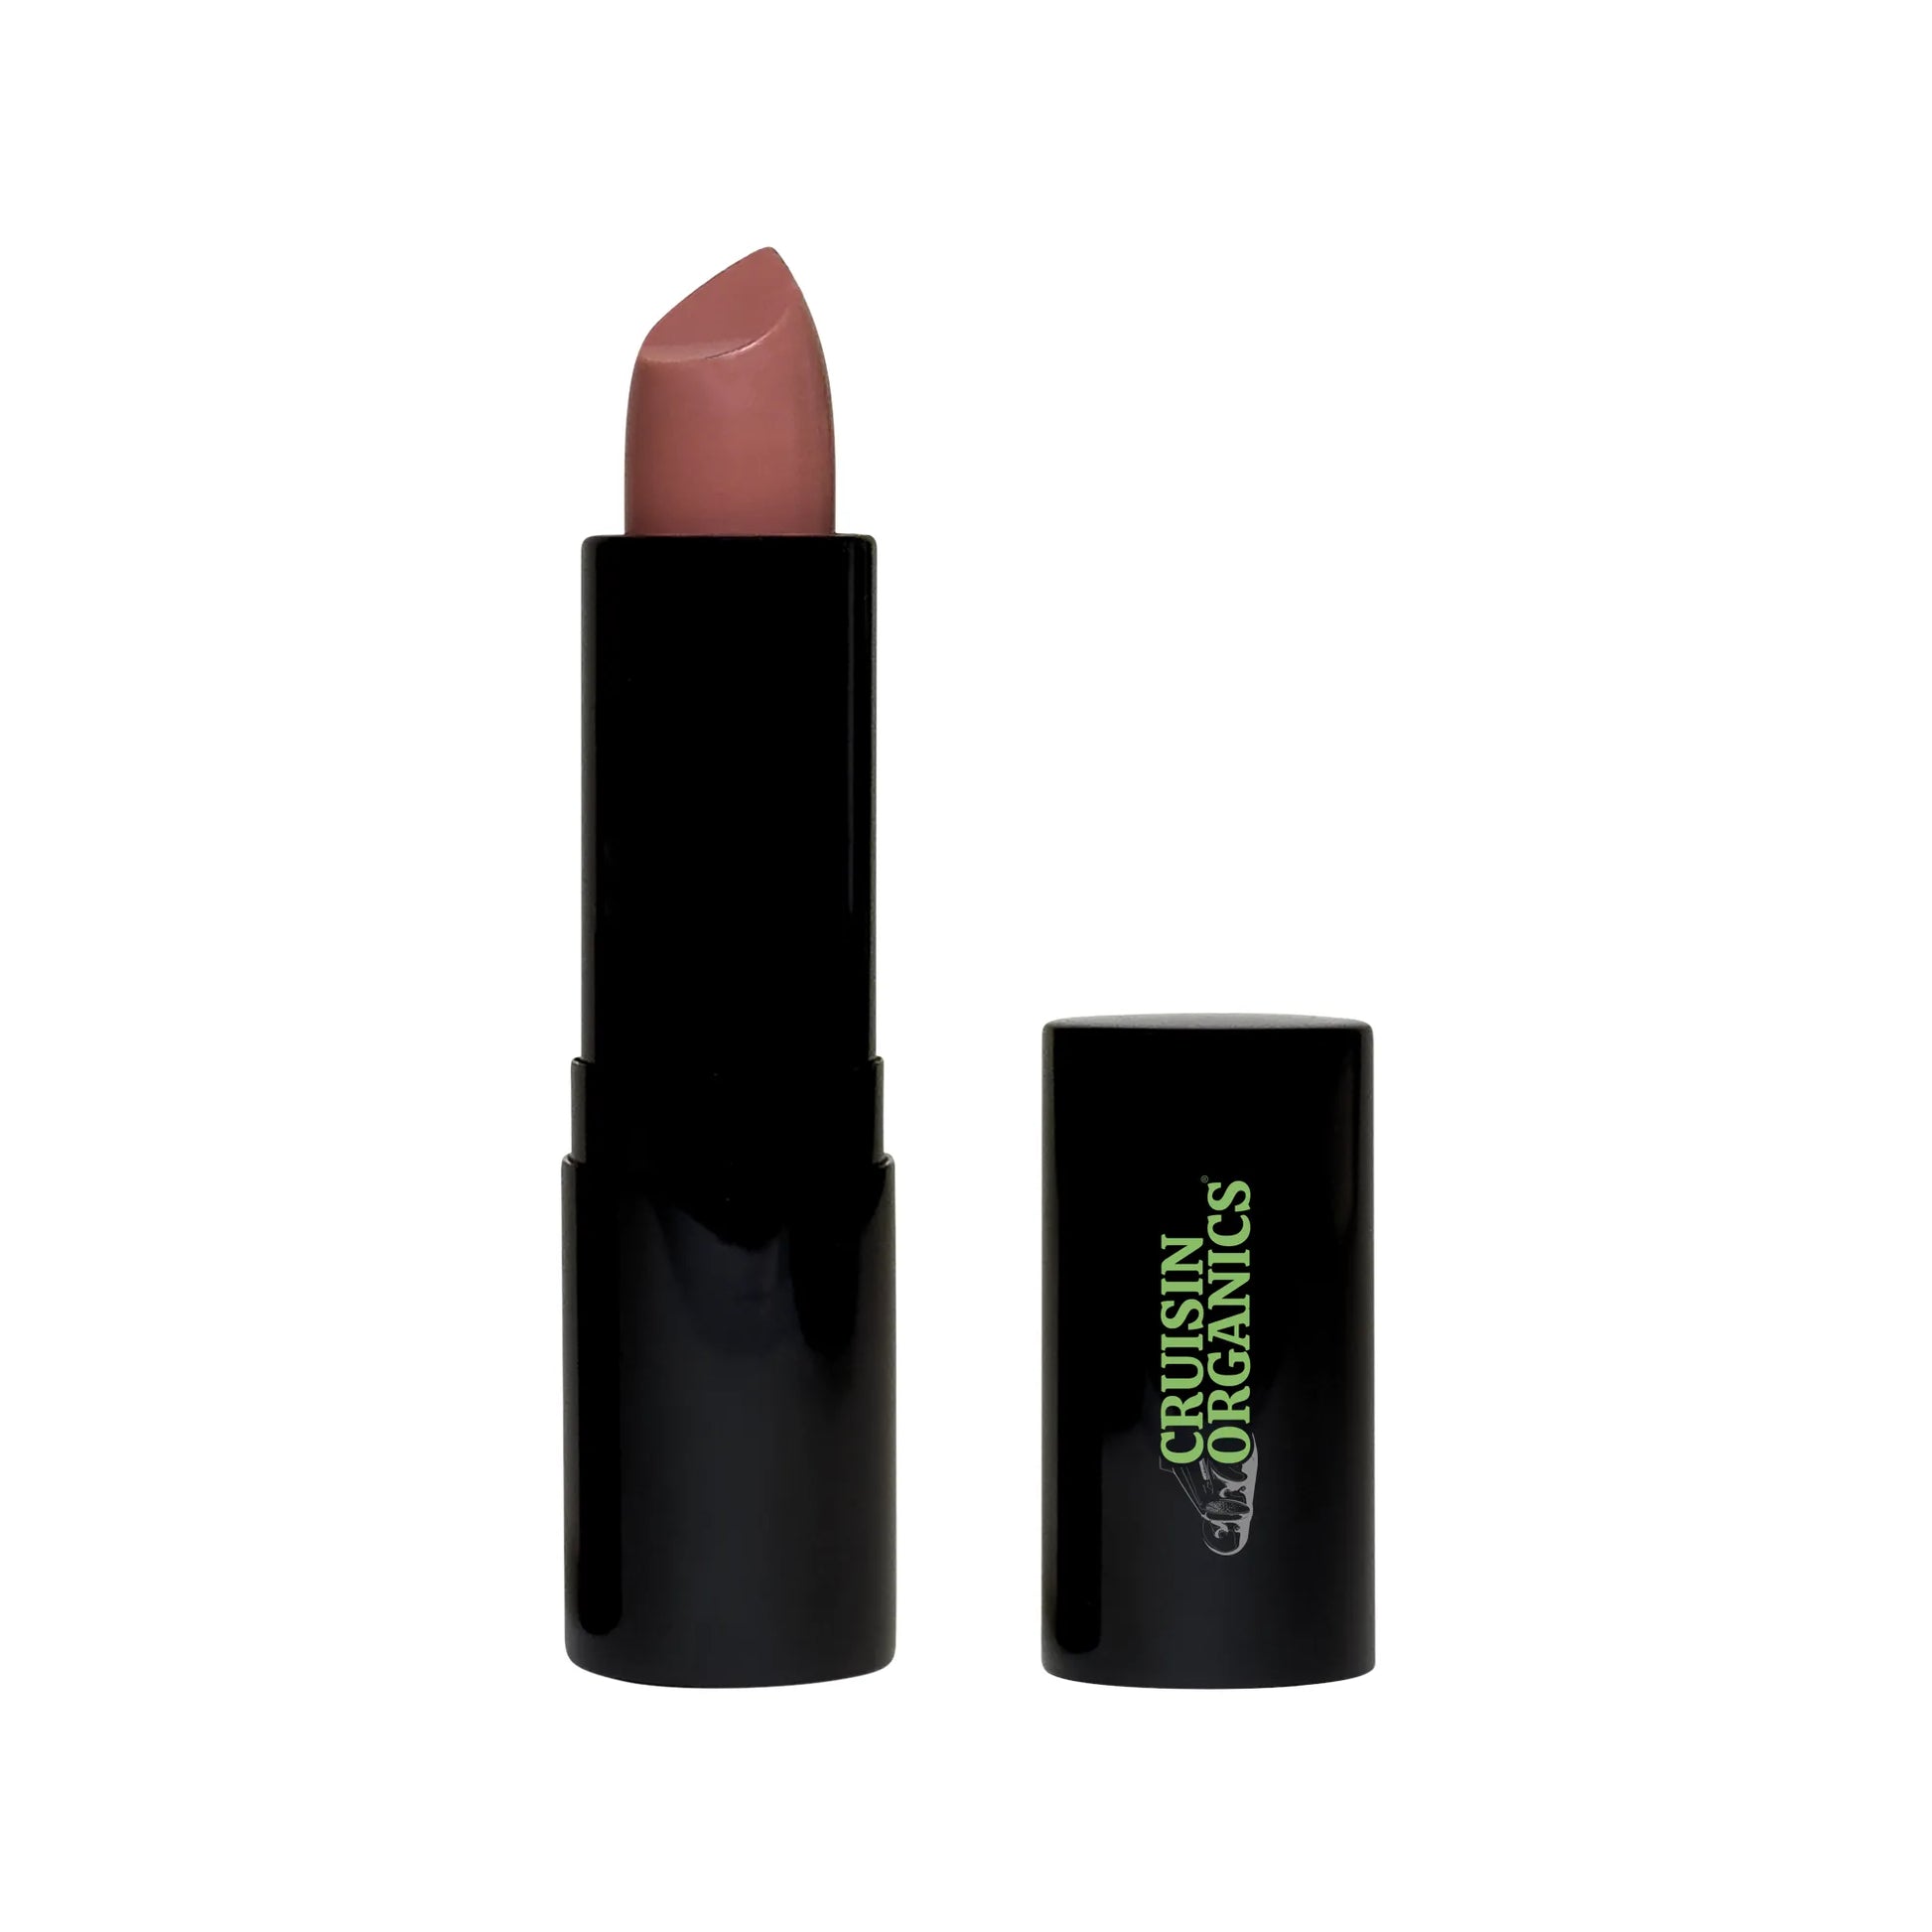 Matte Lipstick in Lustrous Latte from Cruisin Organics. With opulent lip components that aid in anti-aging, exudes beauty.